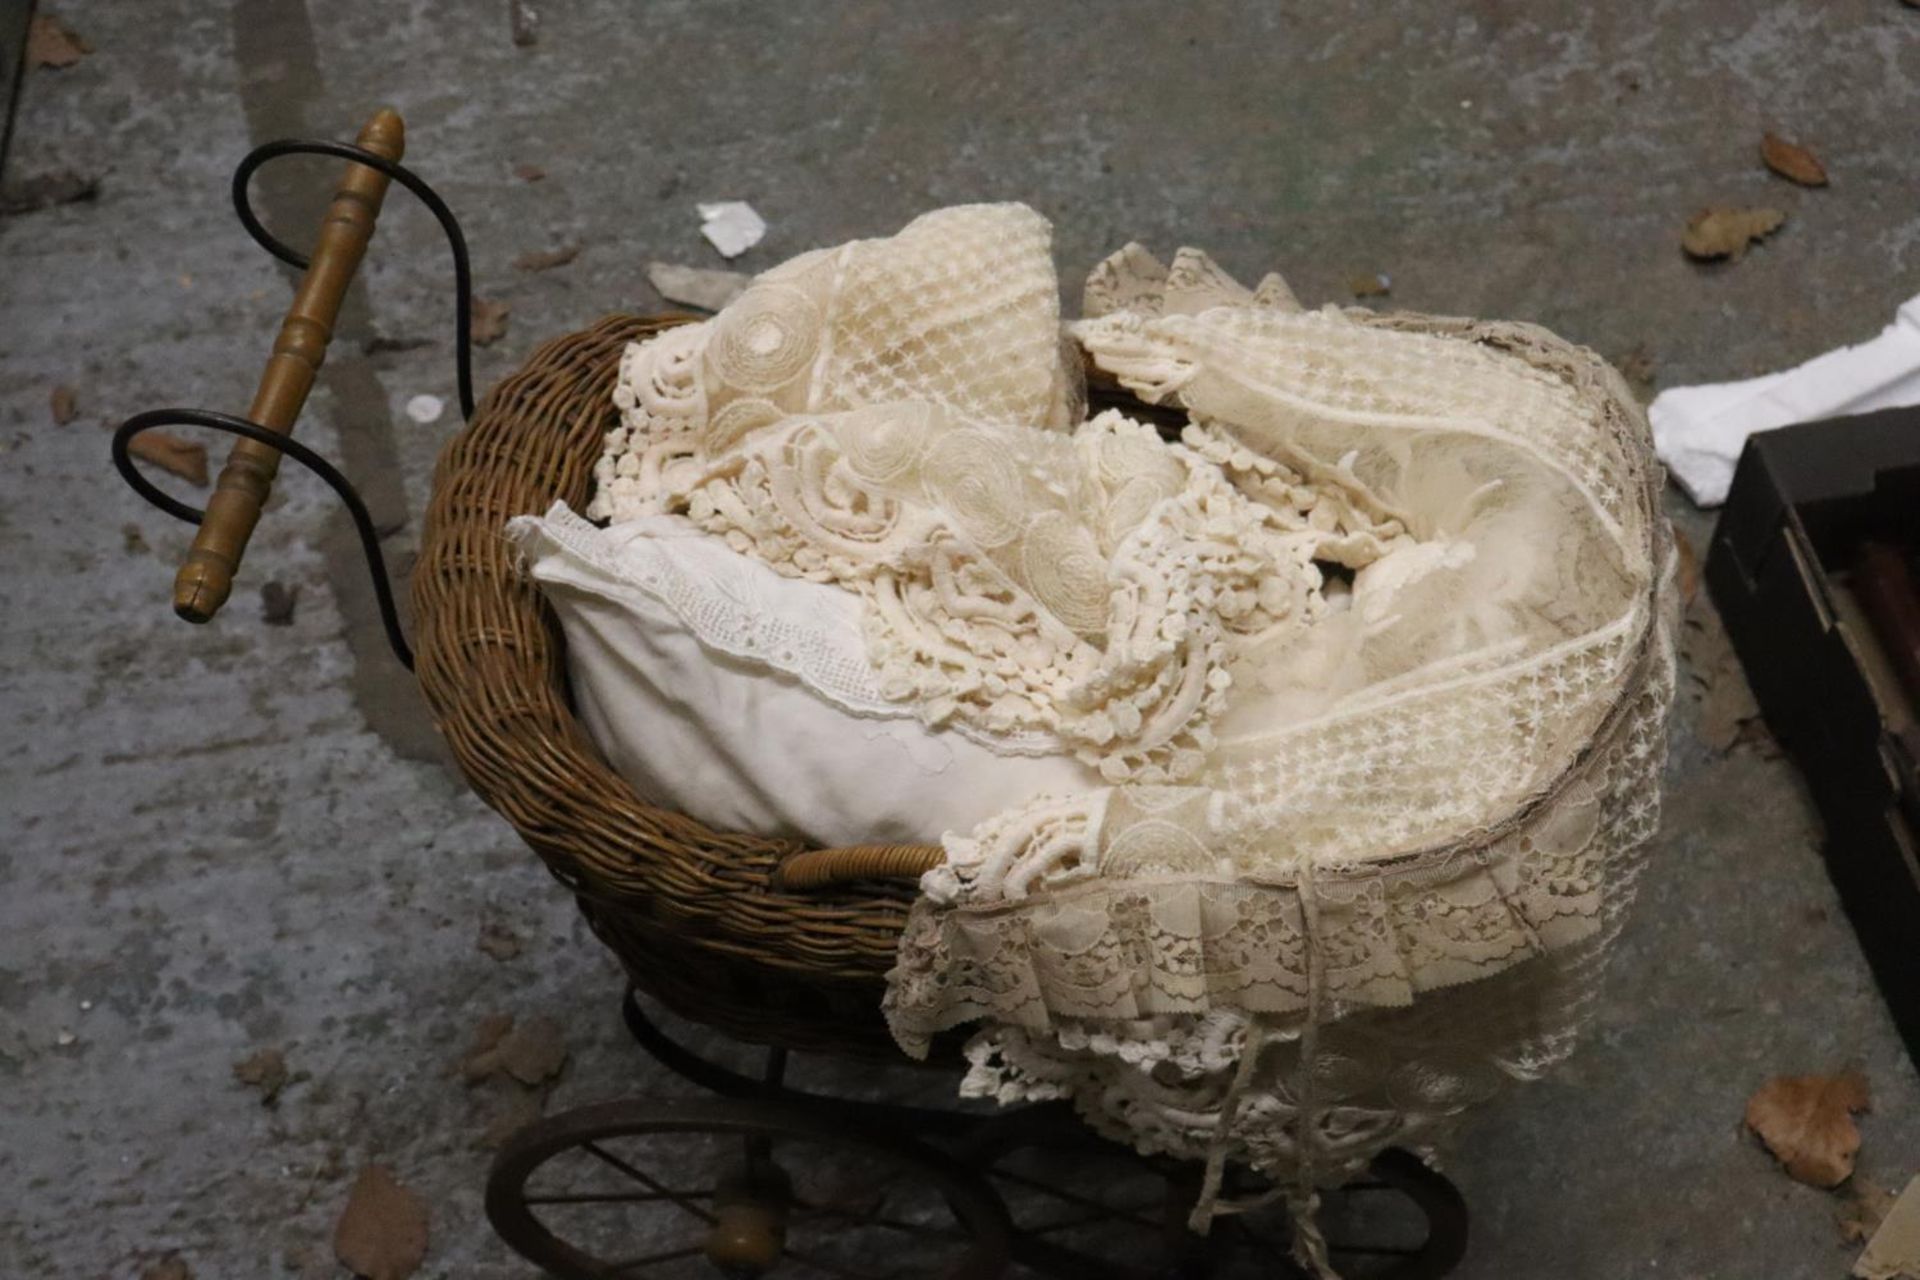 A VICTORIAN CHILD'S PRAM WITH LACE COVERS - Image 2 of 7